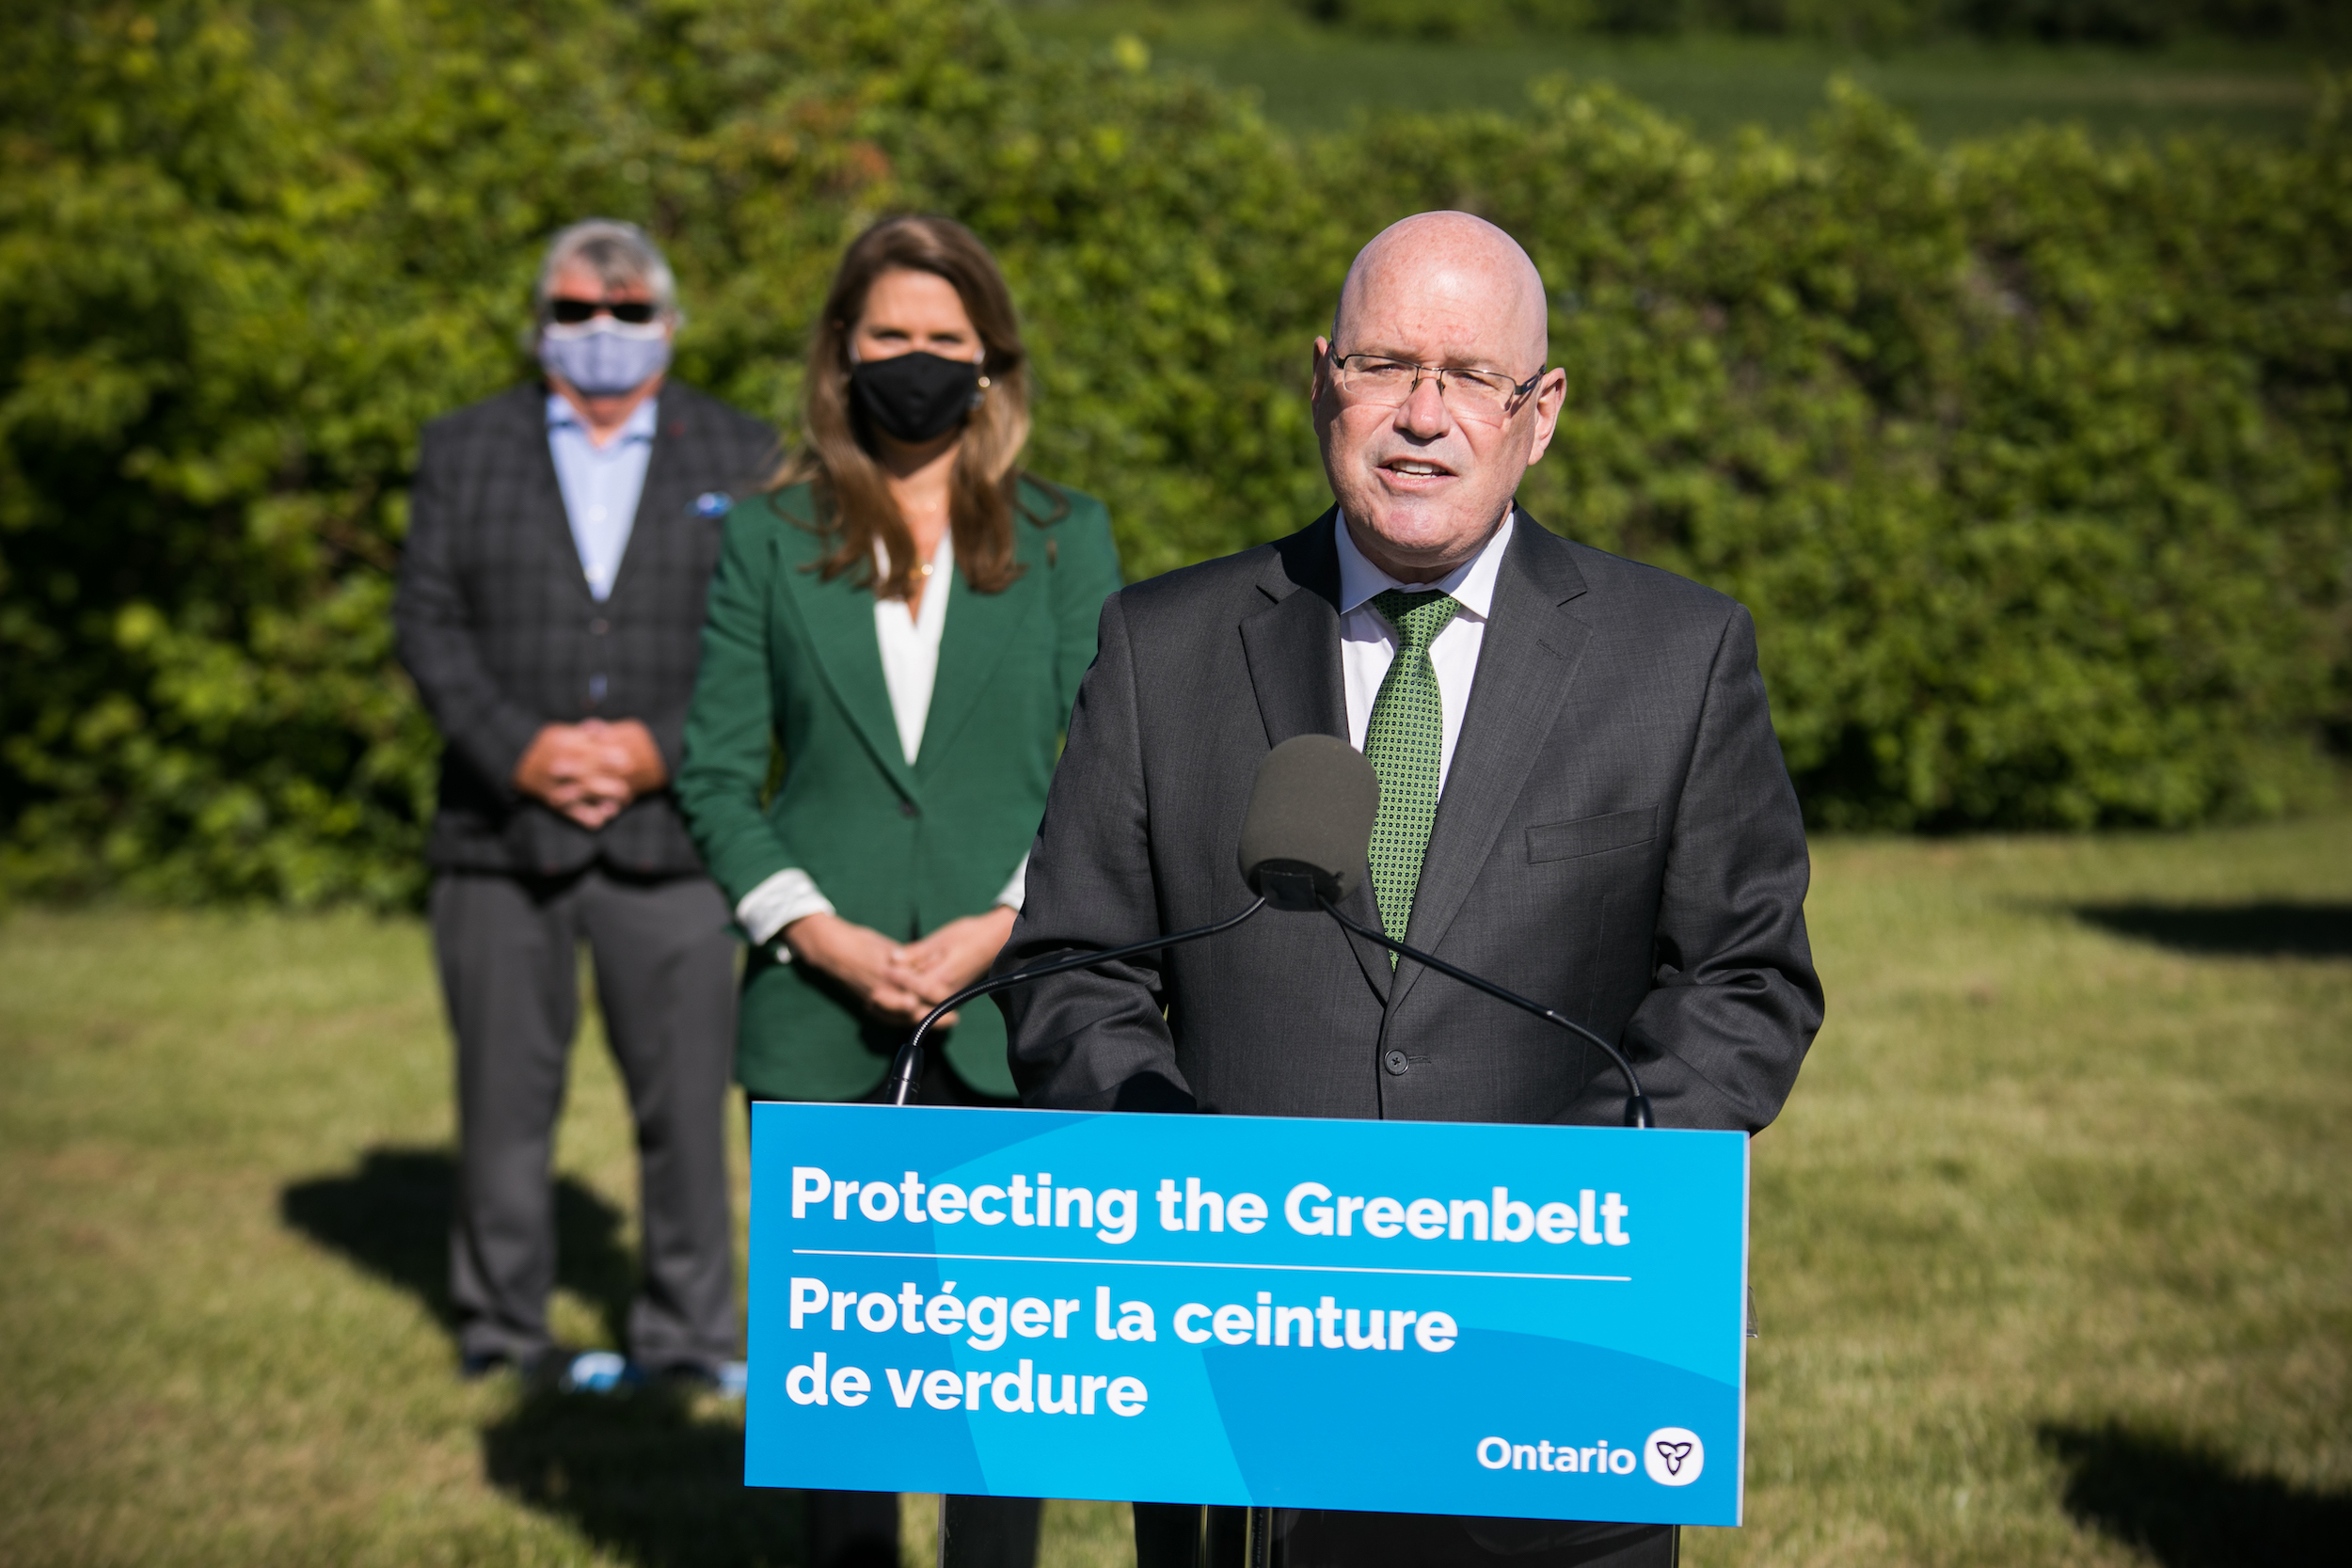 Ontario's integrity commissioner will investigate whether Municipal Affairs and Housing Minister Steve Clark breached rules that bar MPPs from making decisions or using insider information improperly, in regards to his government's decision to open long-protected Greenbelt land to development.